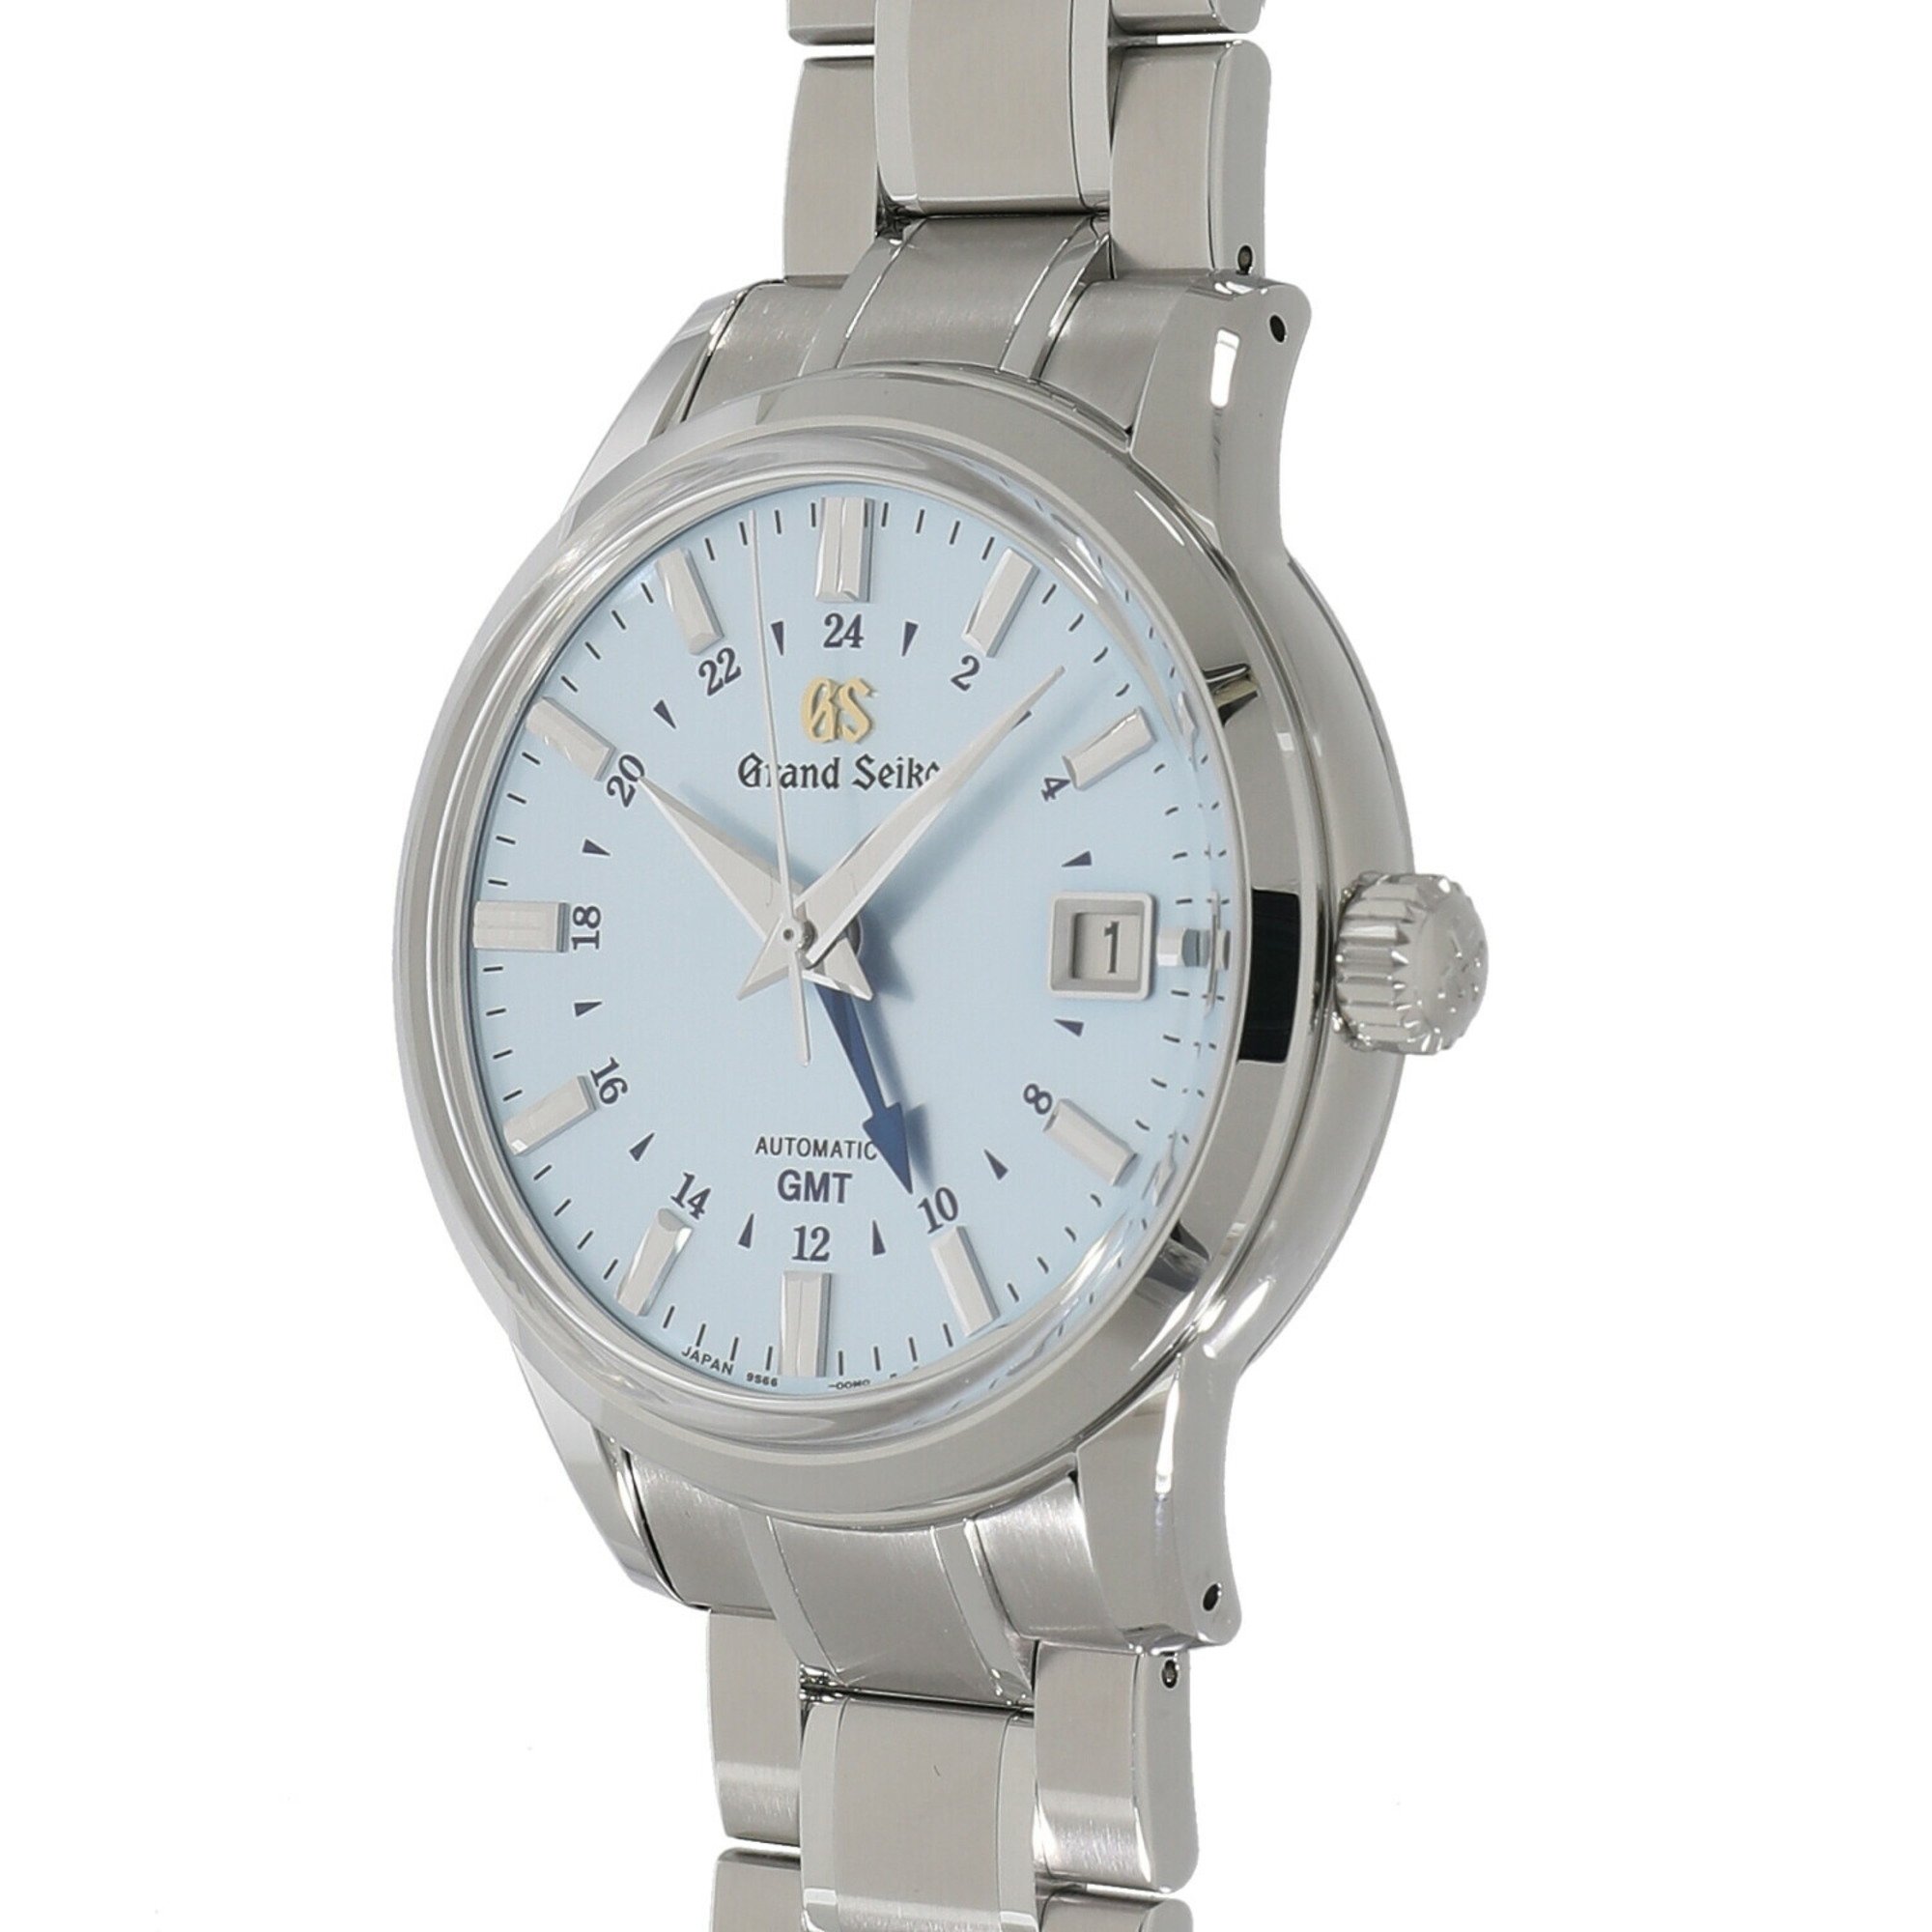 Seiko Grand Elegance Collection Caliber 9S 25th Anniversary 1700 Limited Model SBGM253/9S66-00M0 Sky Blue Men's Watch